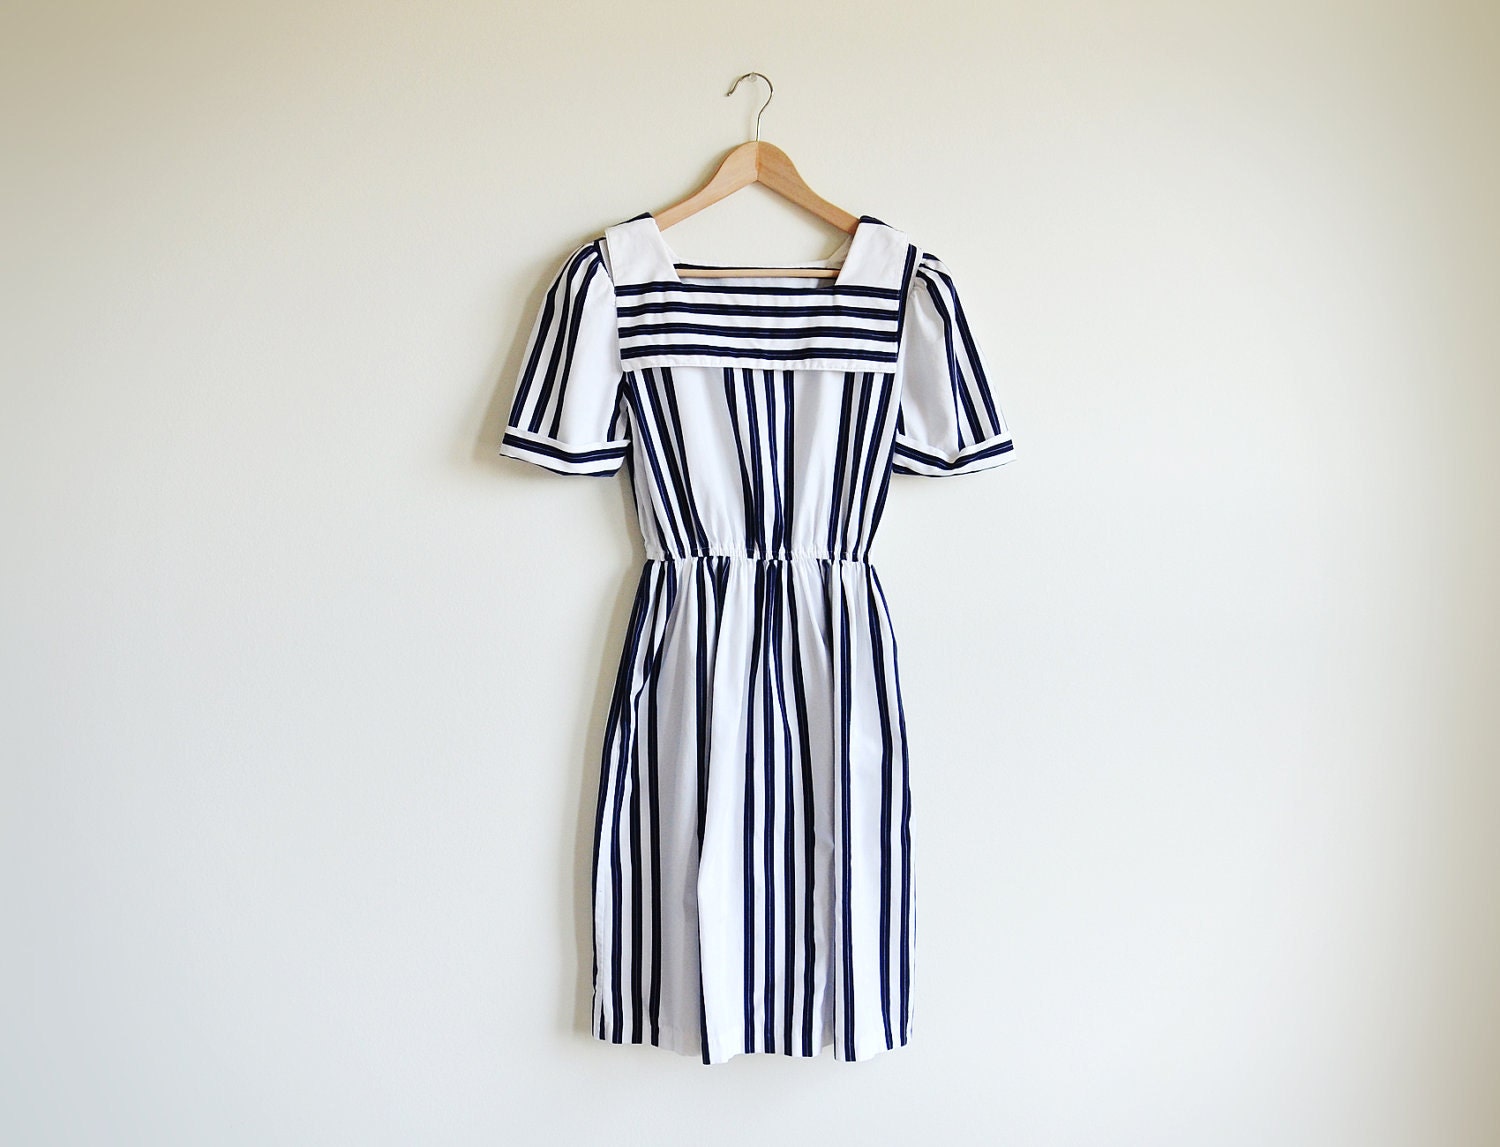 Vintage navy and white stripe dress with sailor collar.